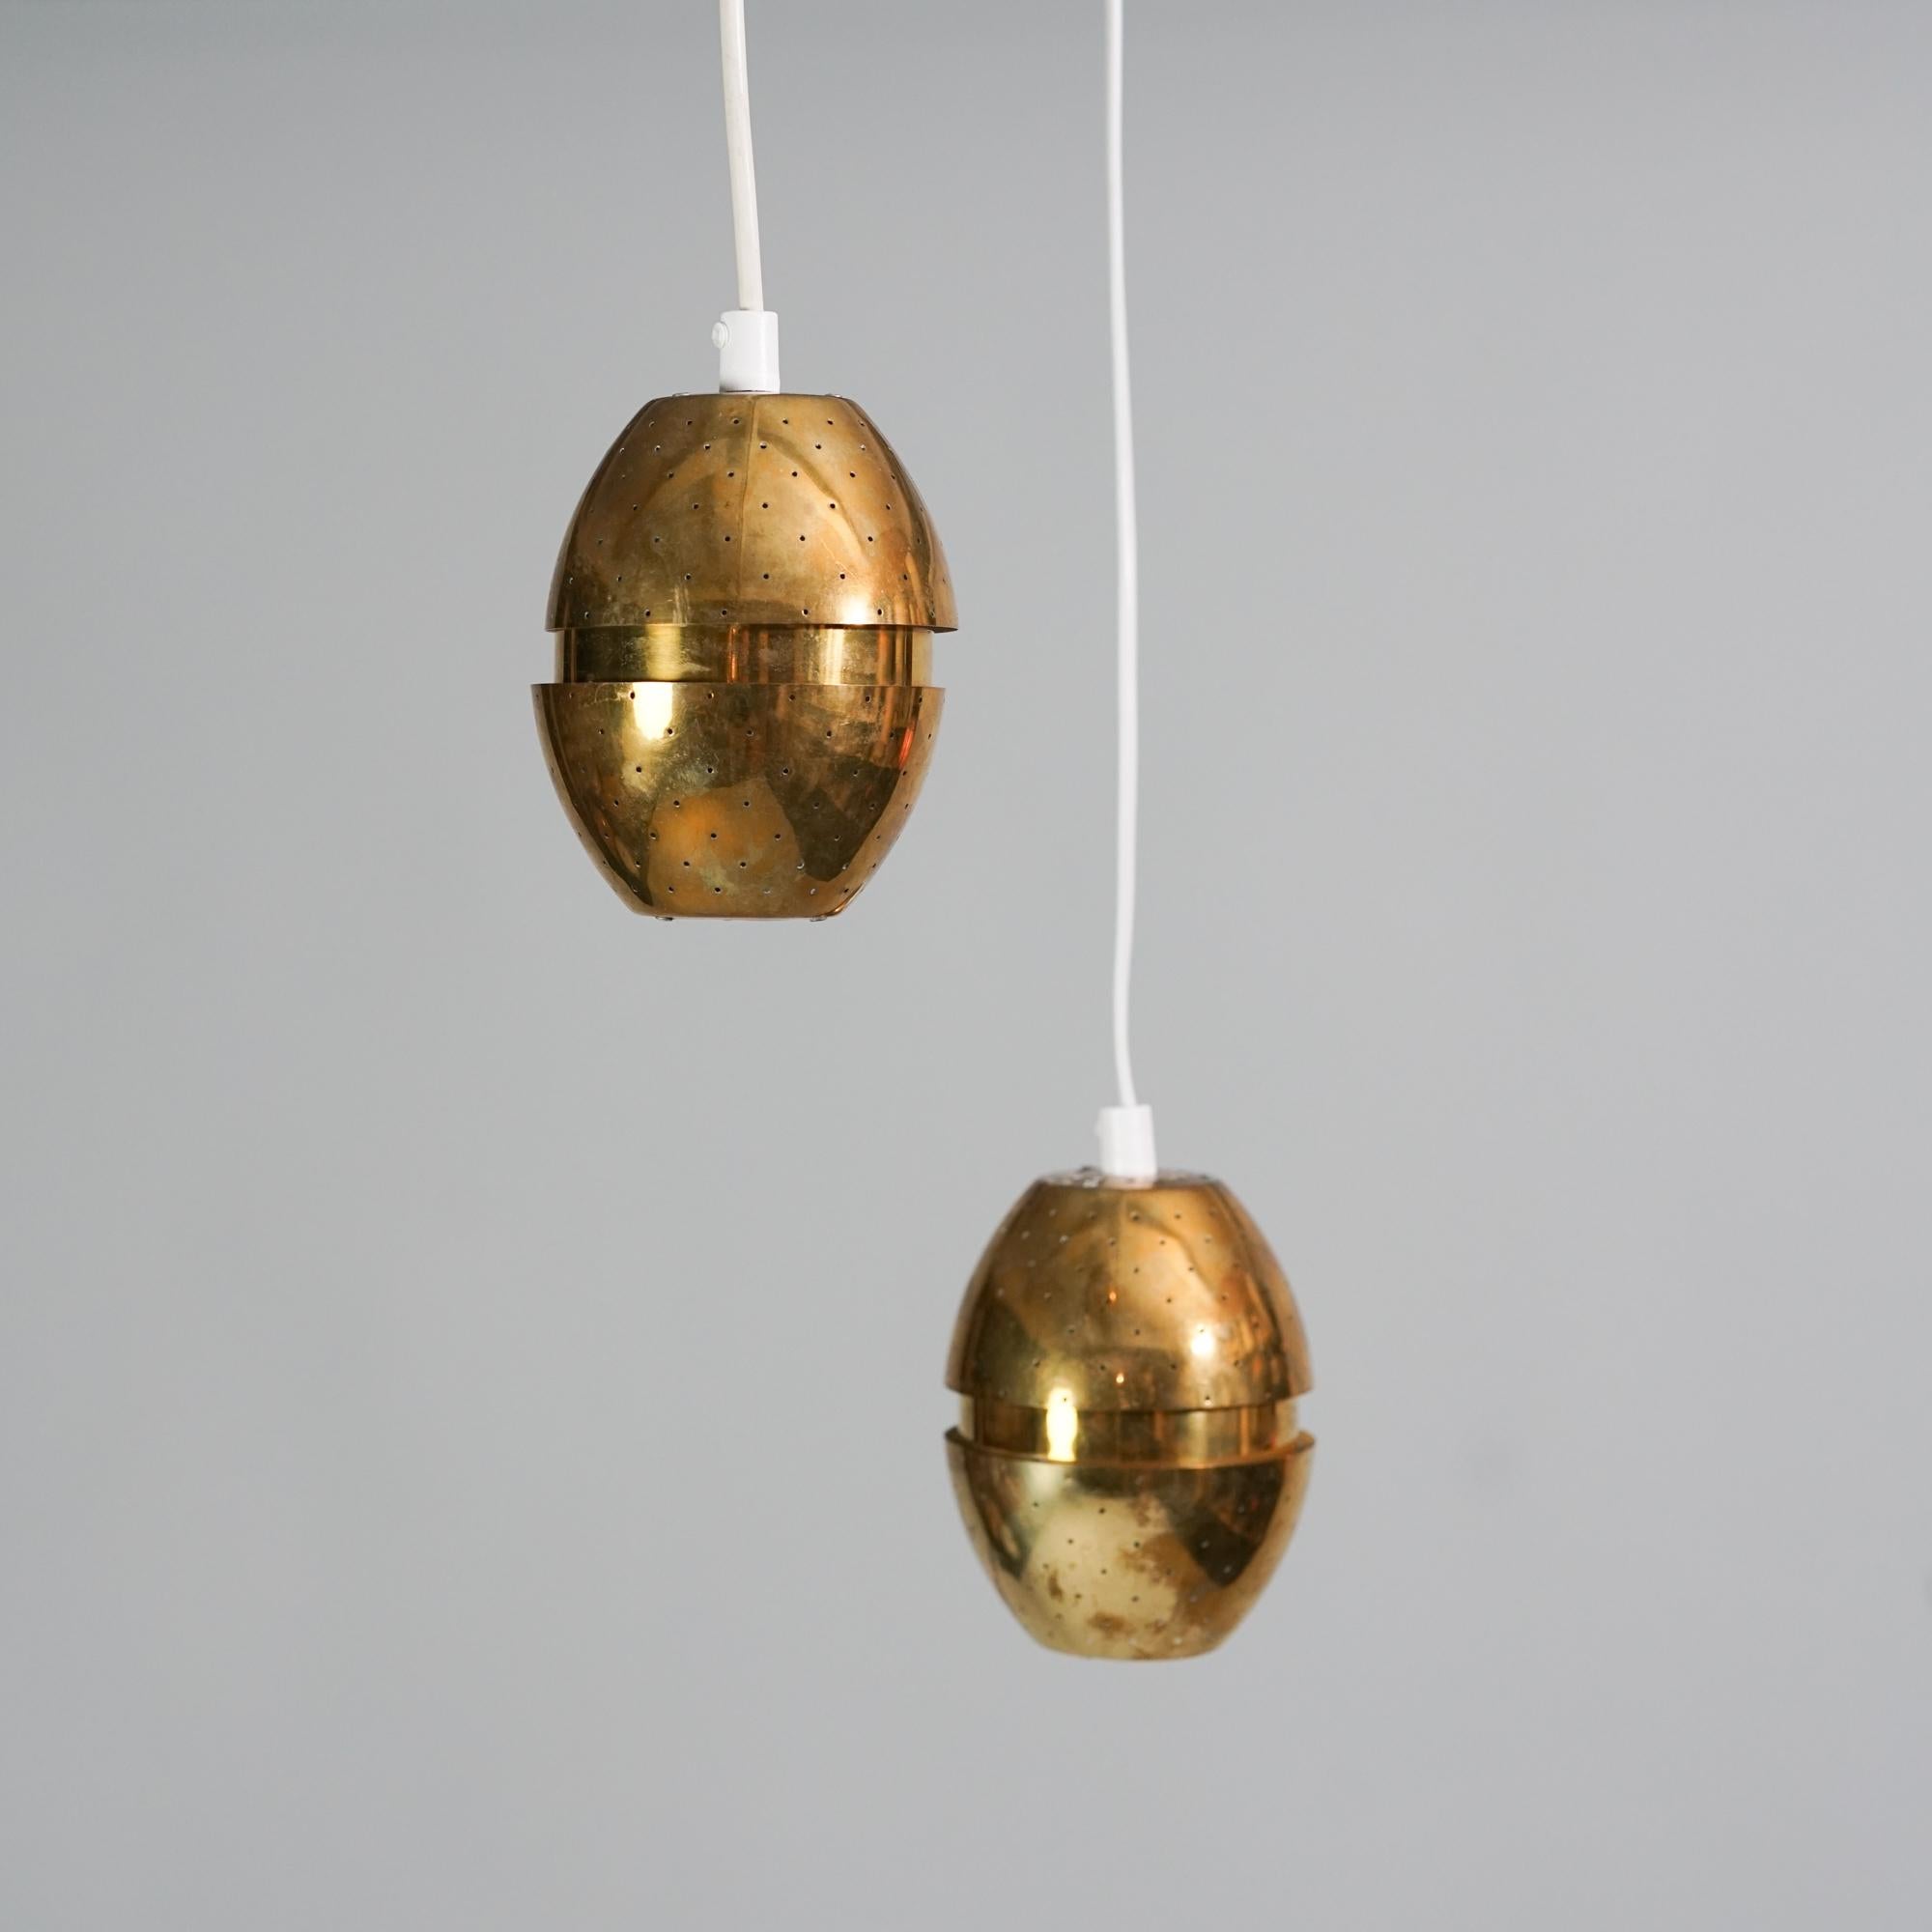 Pair of model Florina T790 pendants designed by Hans-Agne Jacobsson for AB Markaryd on the 1970s. Brass. Good vintage condition, minor patina and wear consistent with age and use. The pendants are sold as a set. 

Hans-Agne Jakobsson (1919-2009) was